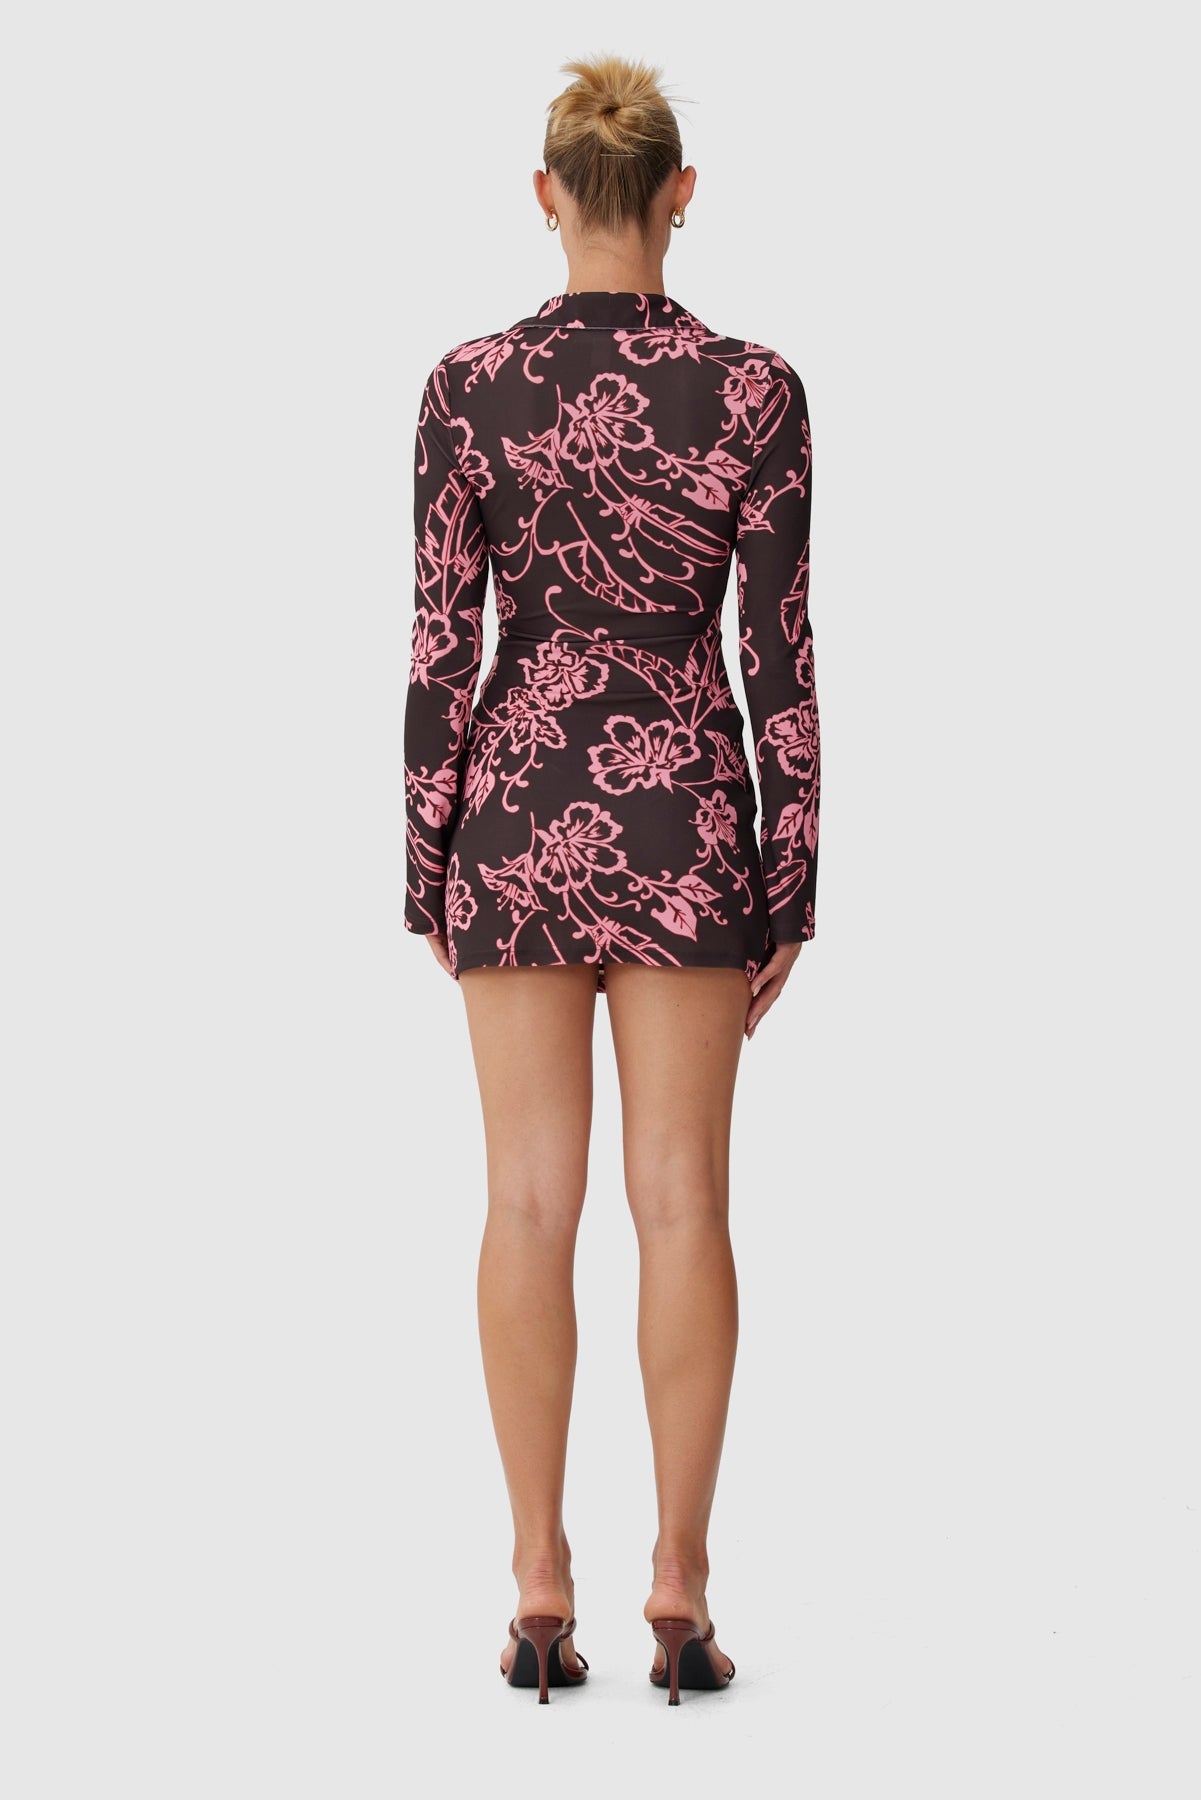 Finders - Eloise Mini Dress - Chocolate Tropical Floral